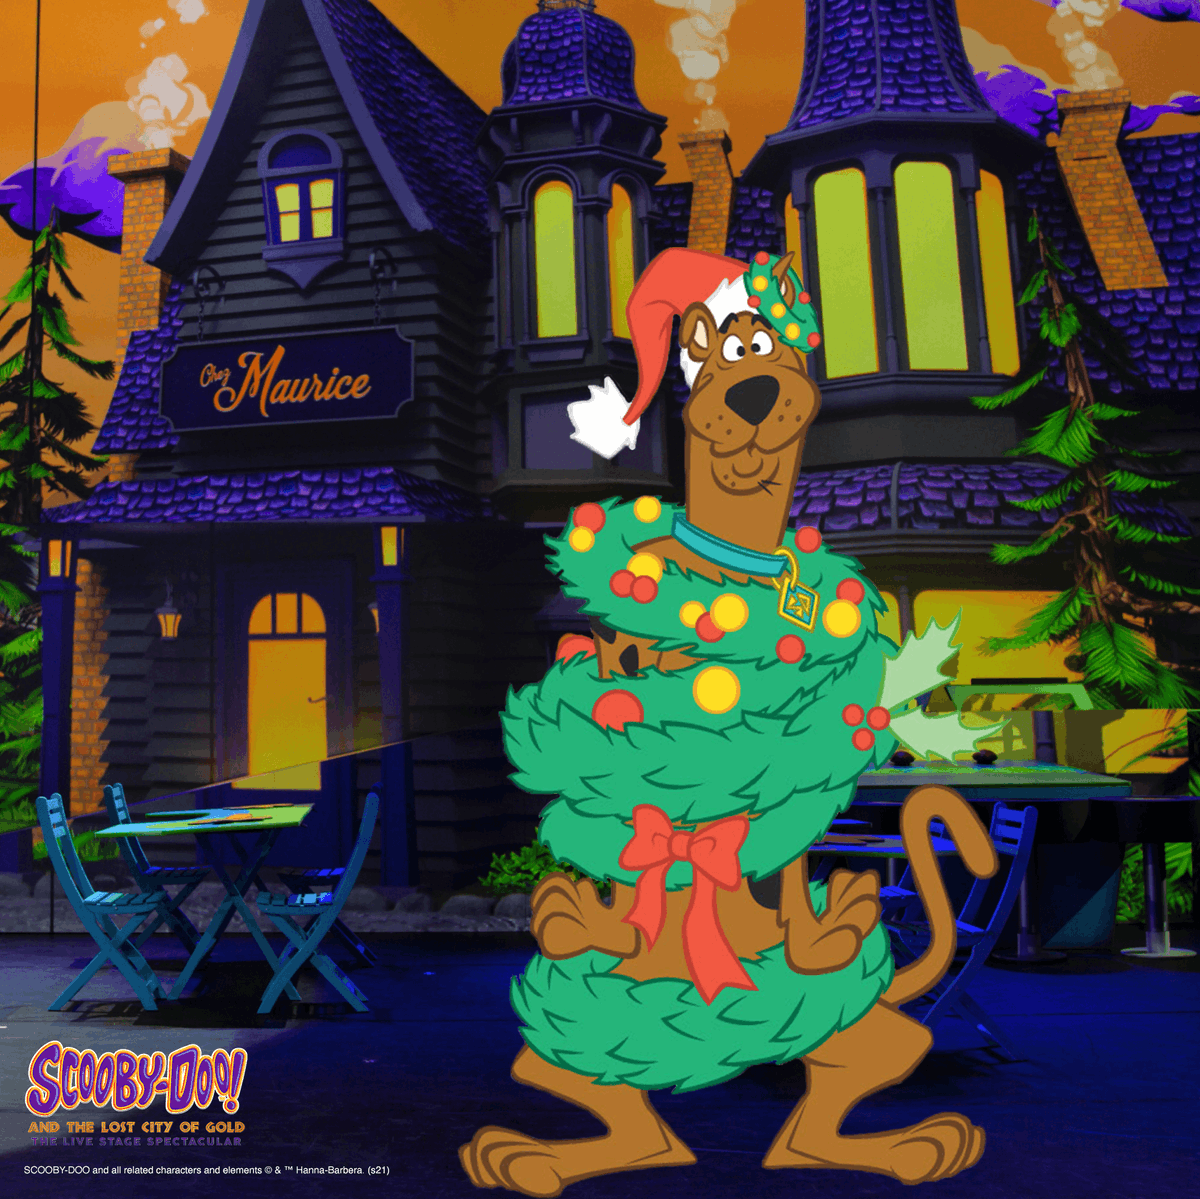 Scooby Live Tour on X Scooby trying to help with Christmas